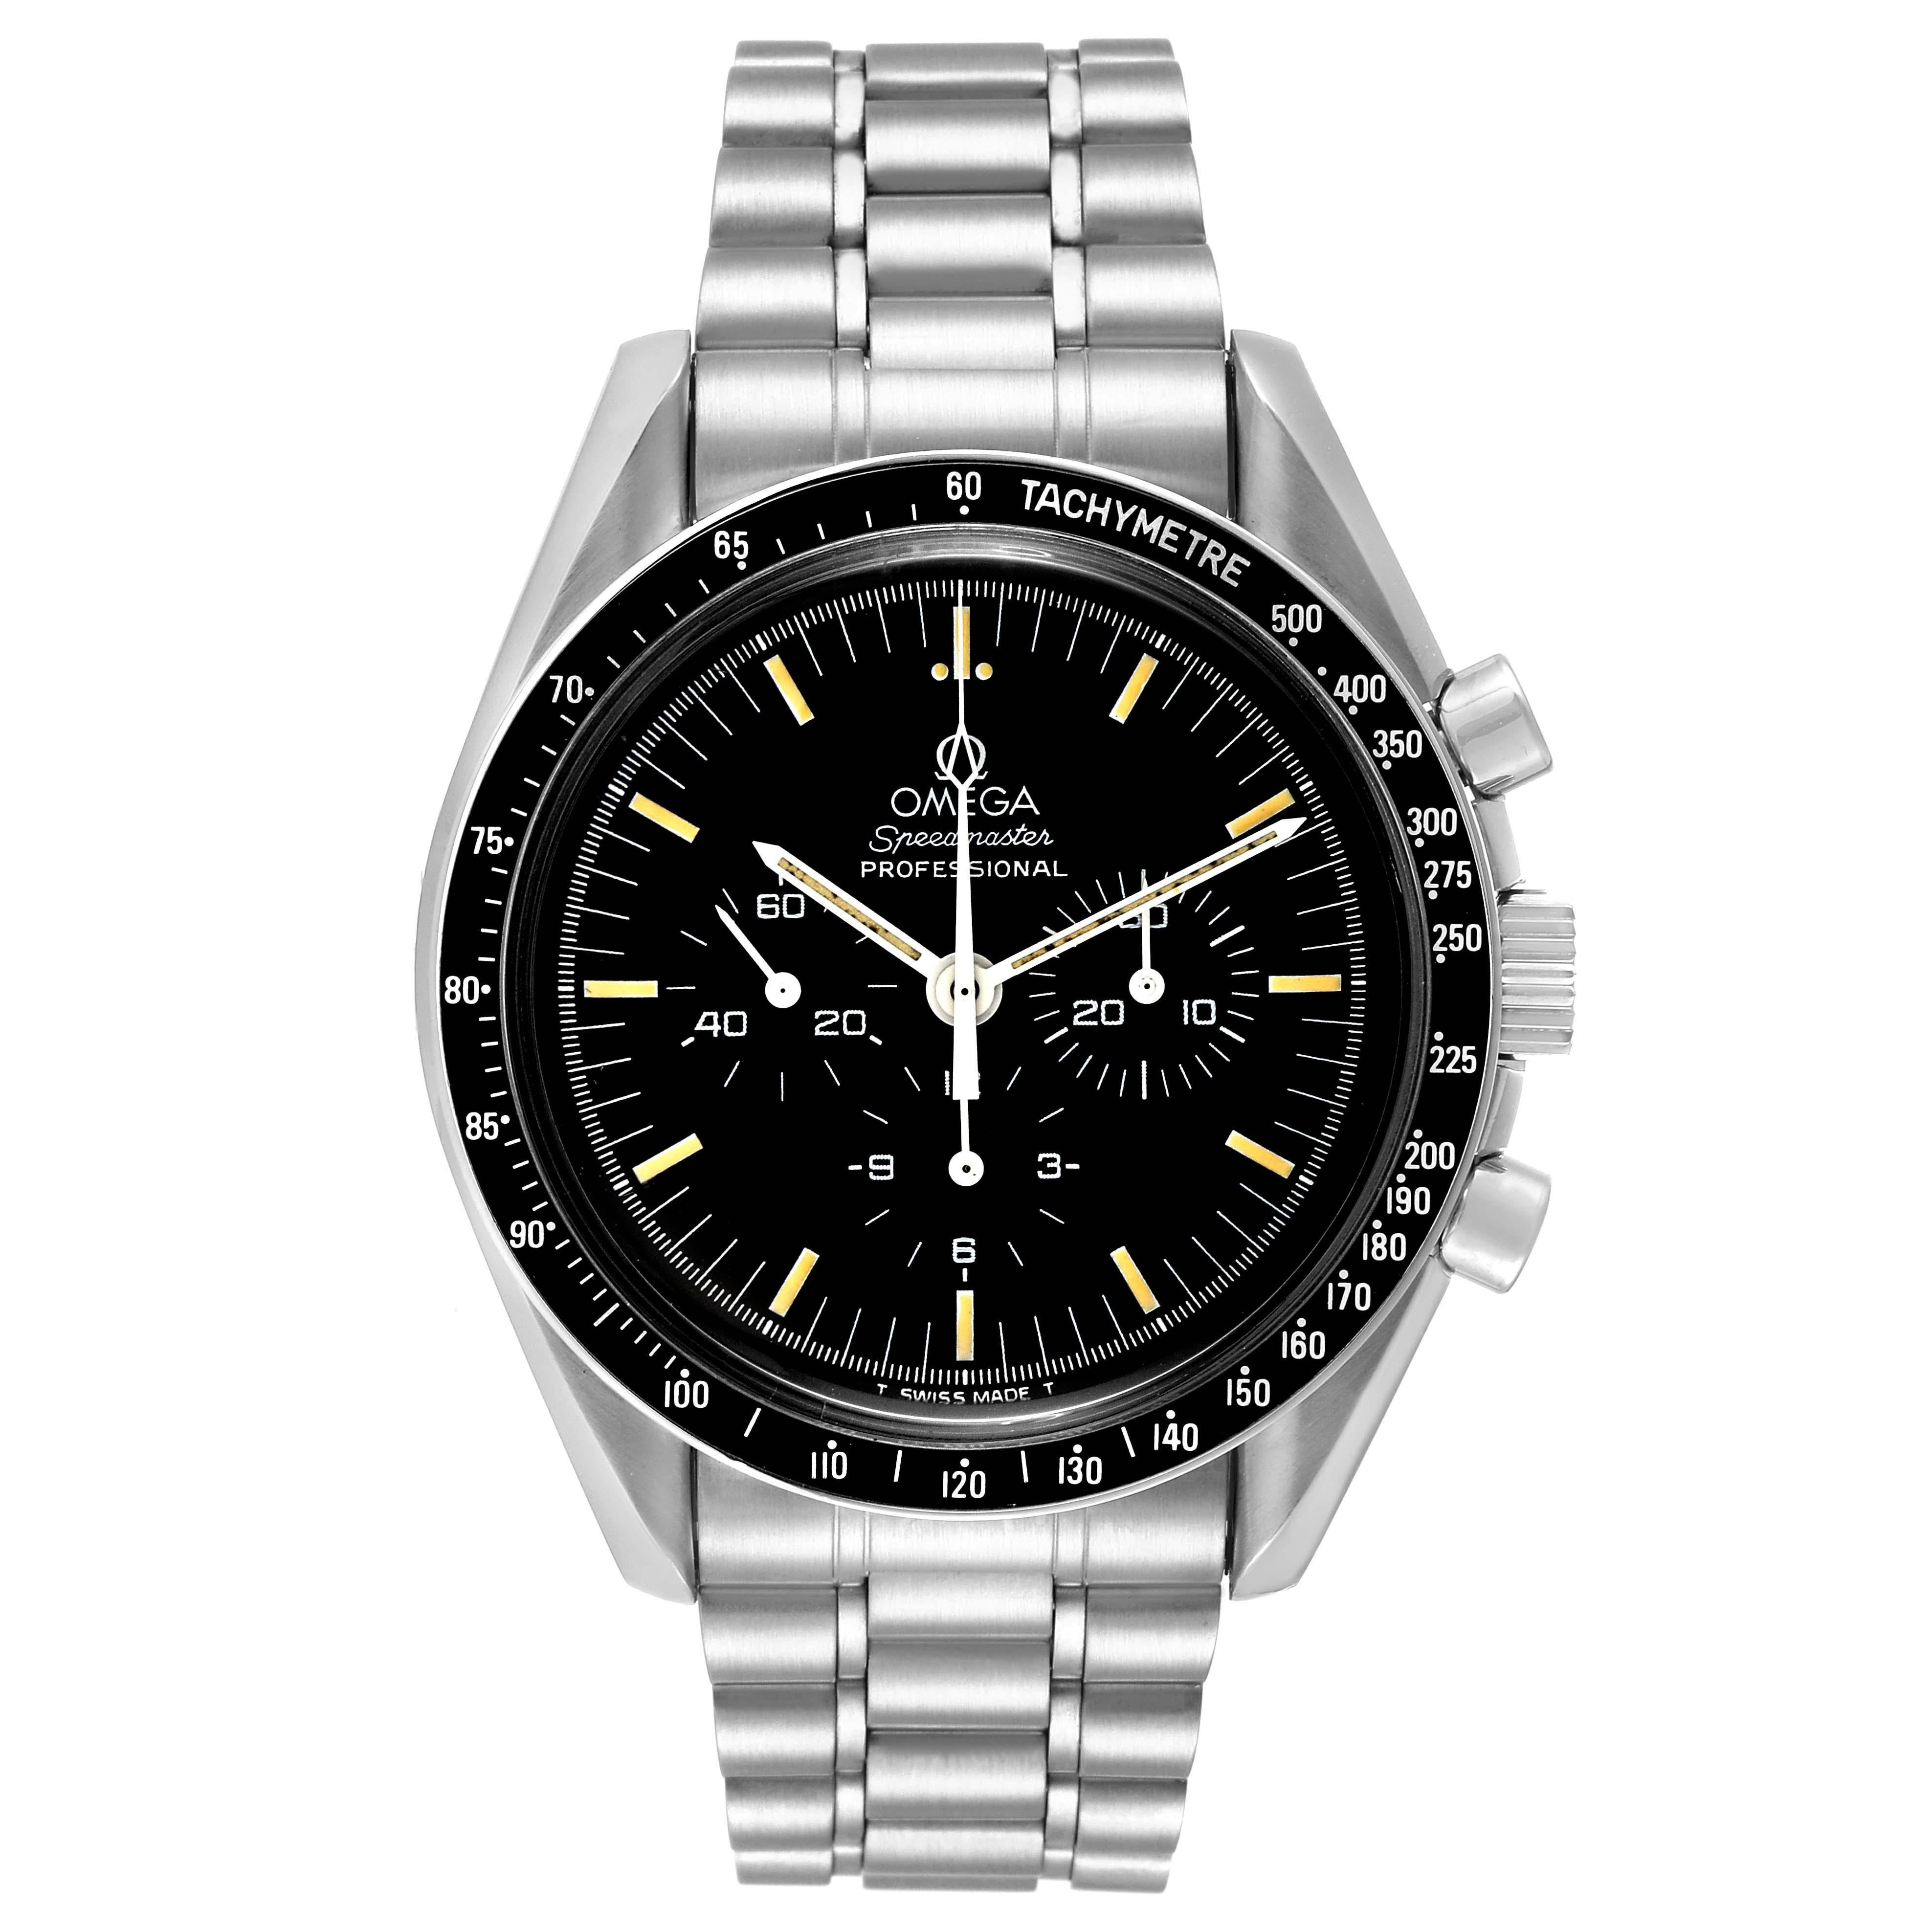 Omega Speedmaster Professional Moonwatch Steel Mens Watch 3592.50.00. Manual winding chronograph movement. Stainless steel round case 42.0 mm in diameter. Exhibition transparent sapphire crystal case back. Black bezel with tachymeter function.